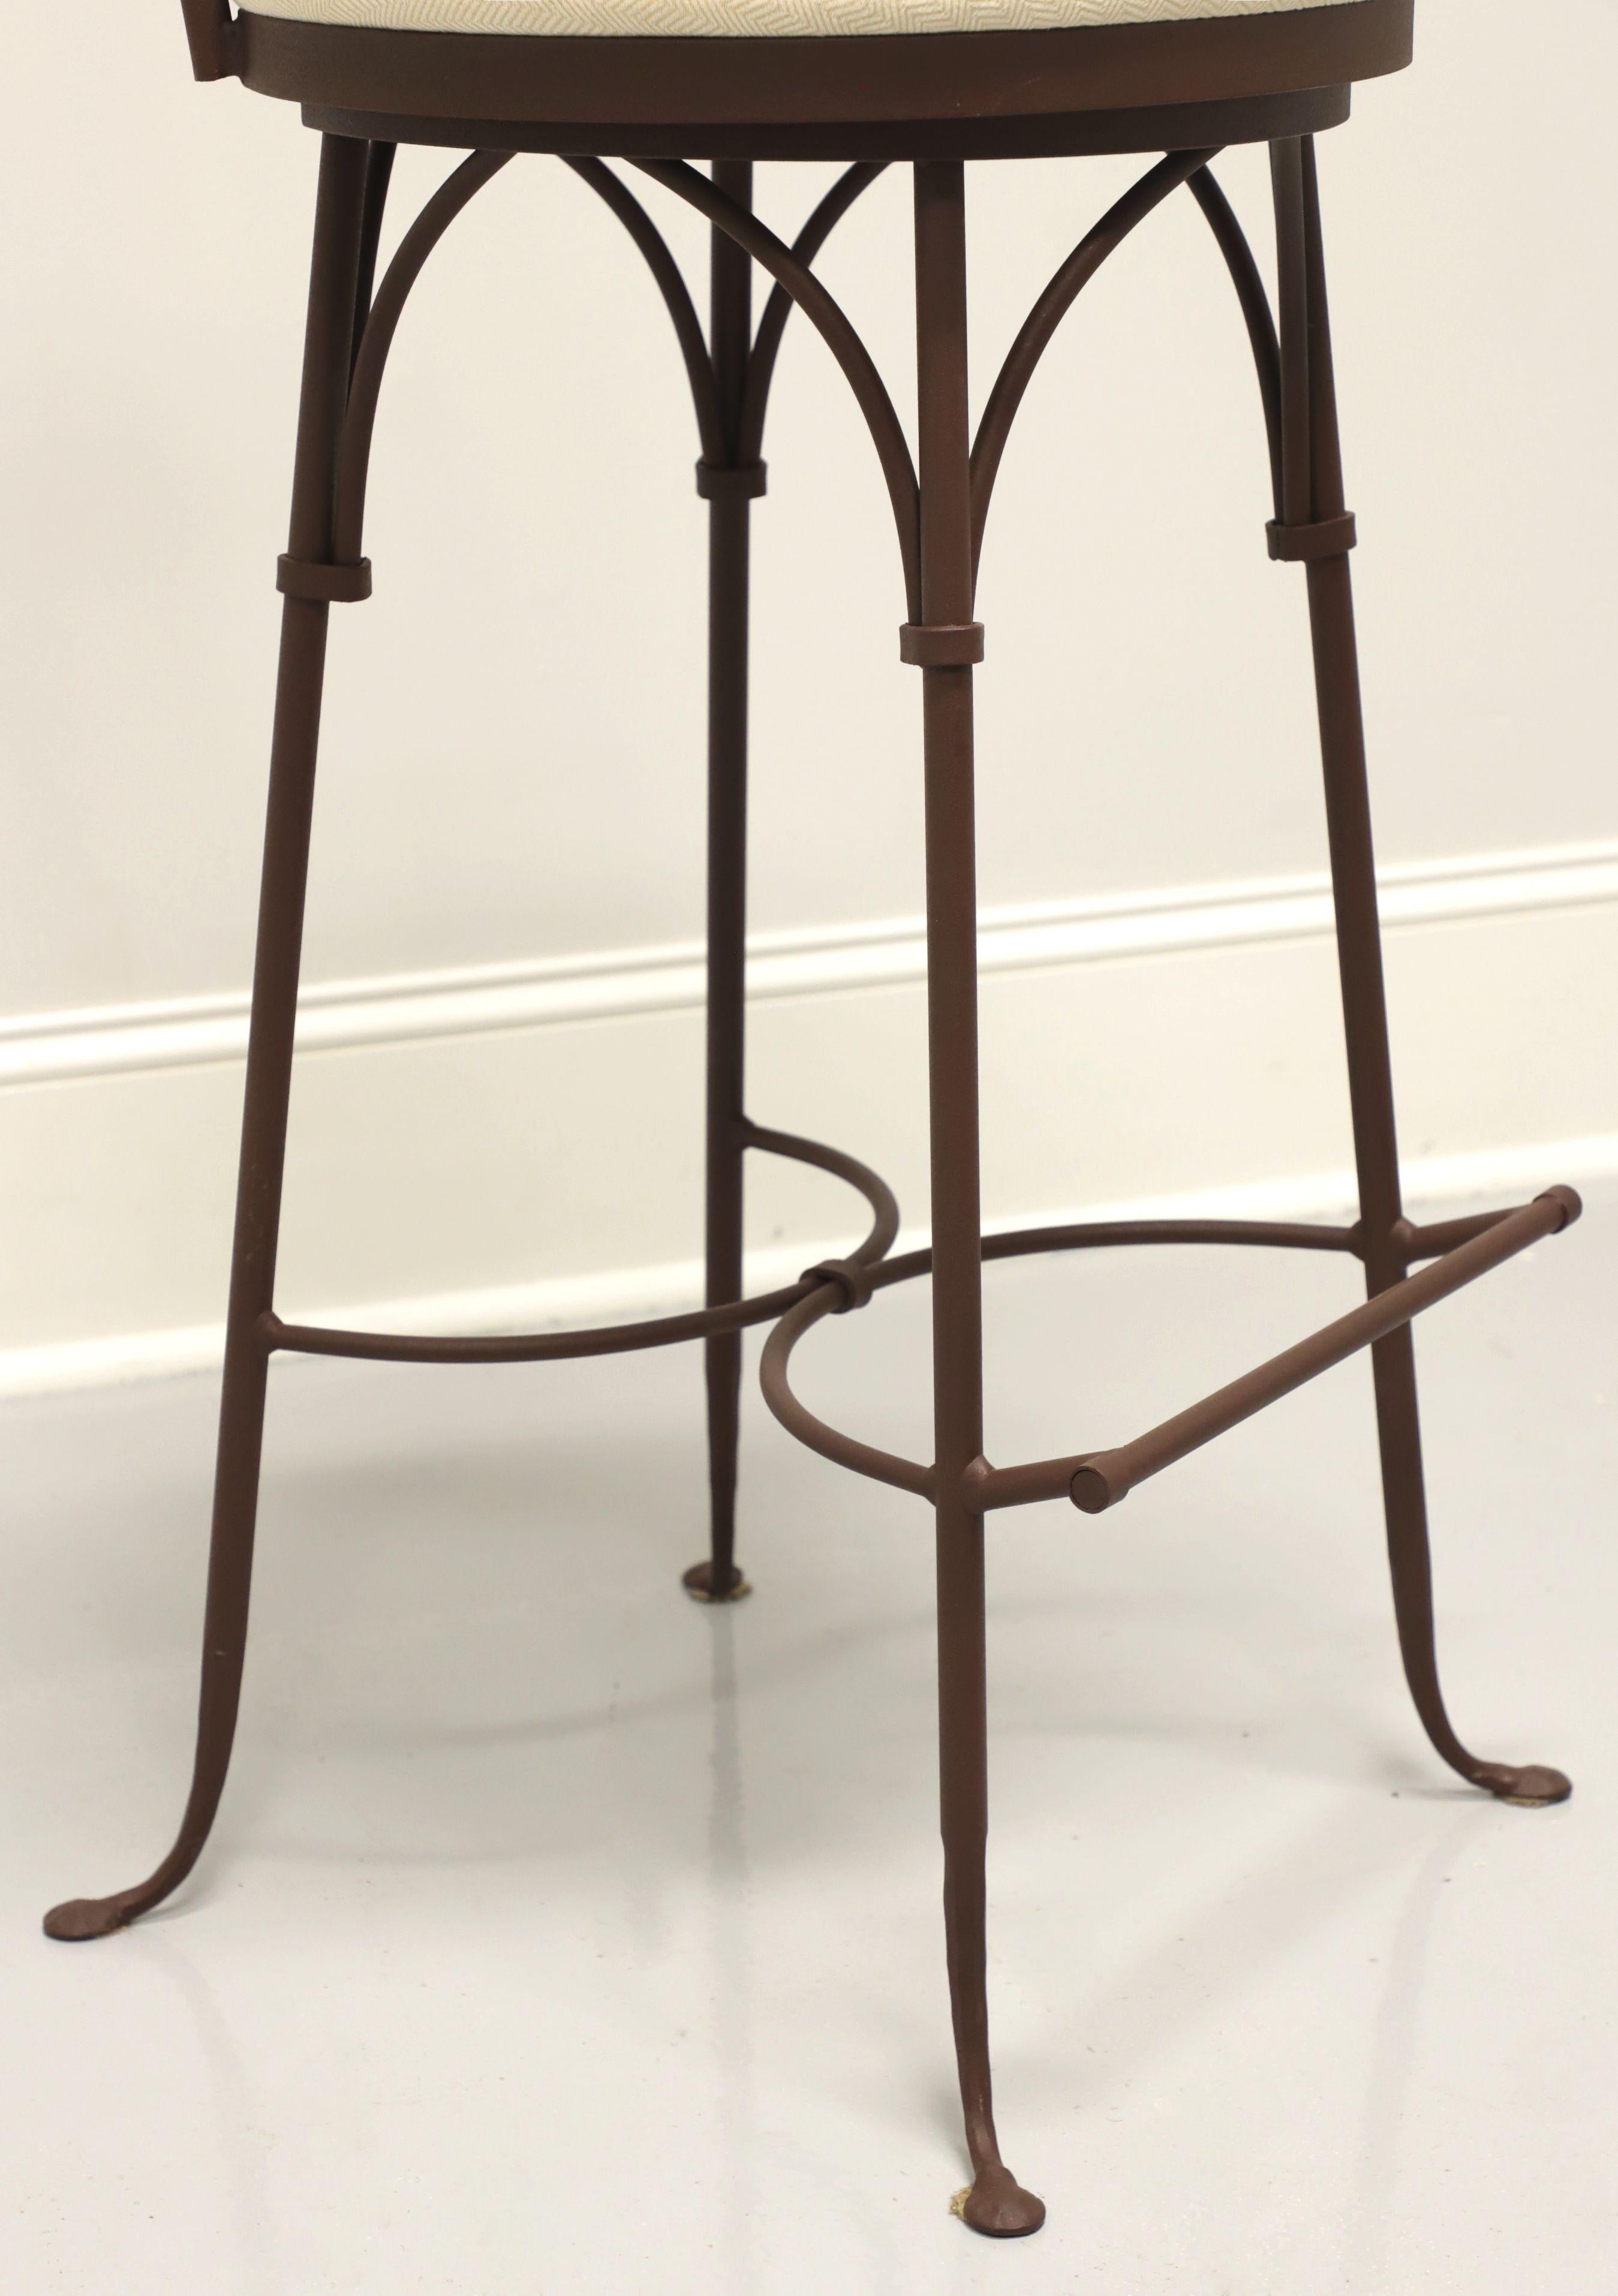 Contemporary CHARLESTON FORGE Wrought Iron Shaker Arch Bar Height Swivel Stools - Pair B For Sale